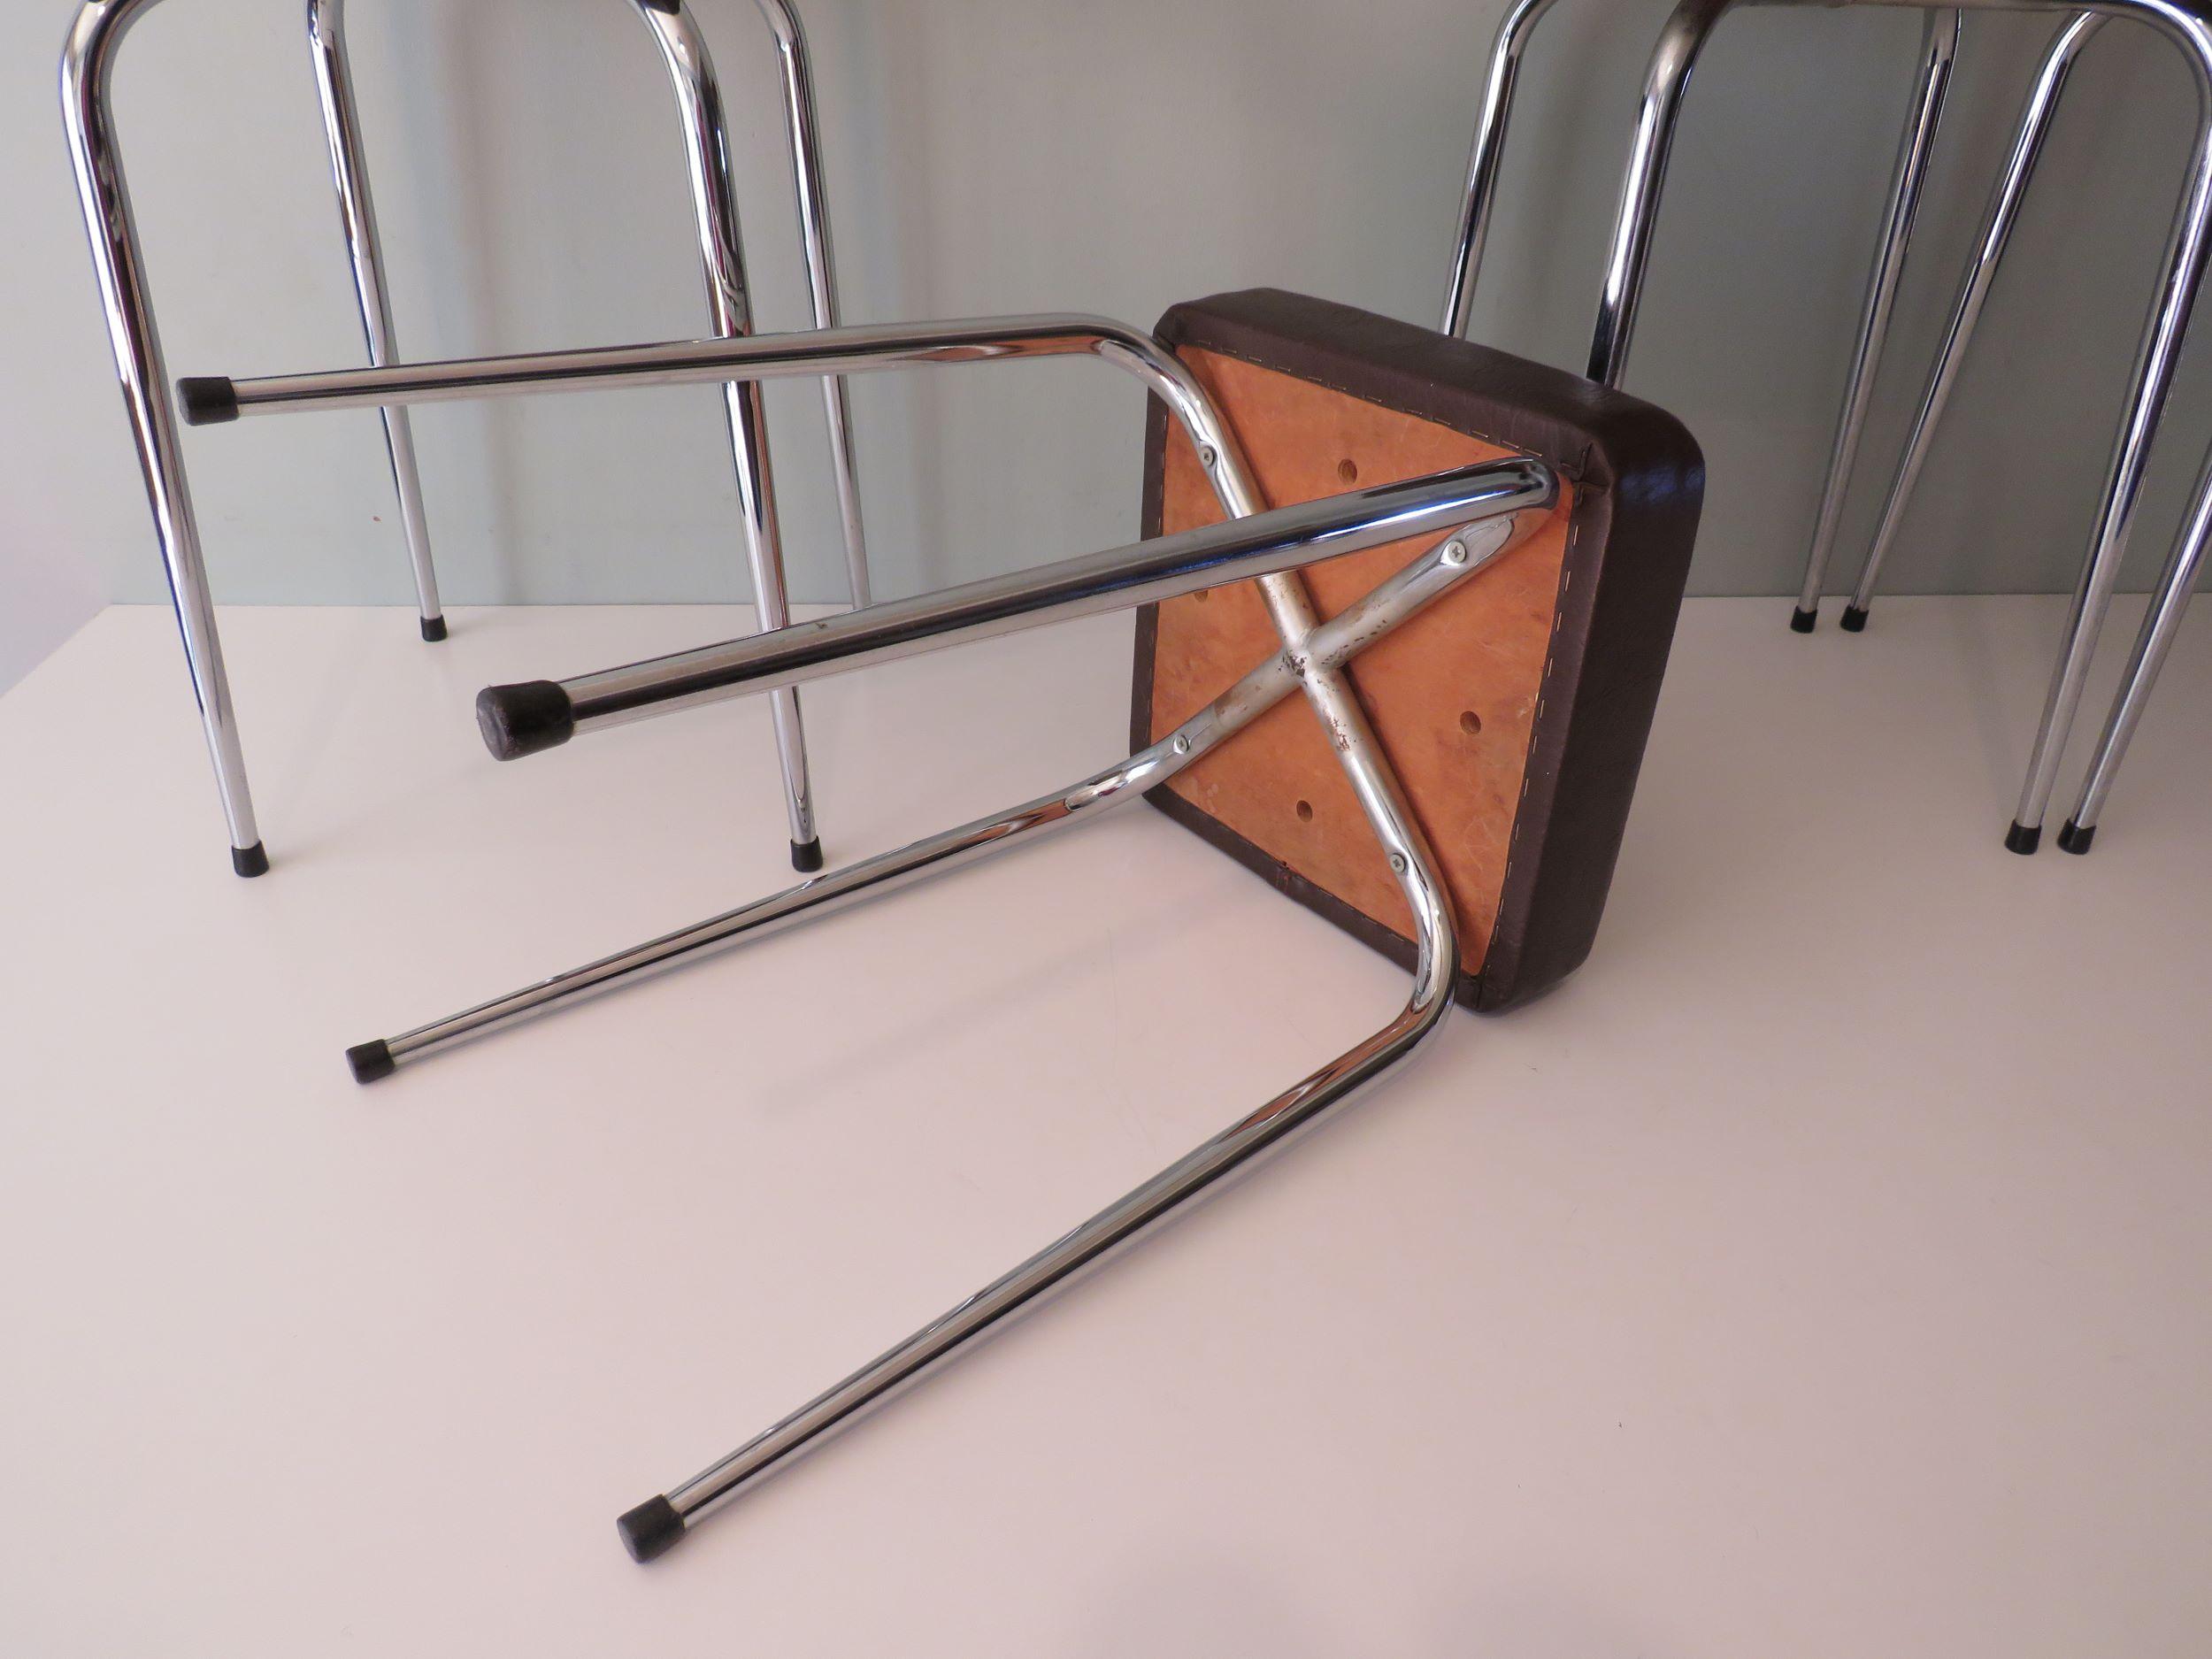 Set of 4 Stools, Chrome and Skai by Poelux, Belgium, 1960-1970 For Sale 1